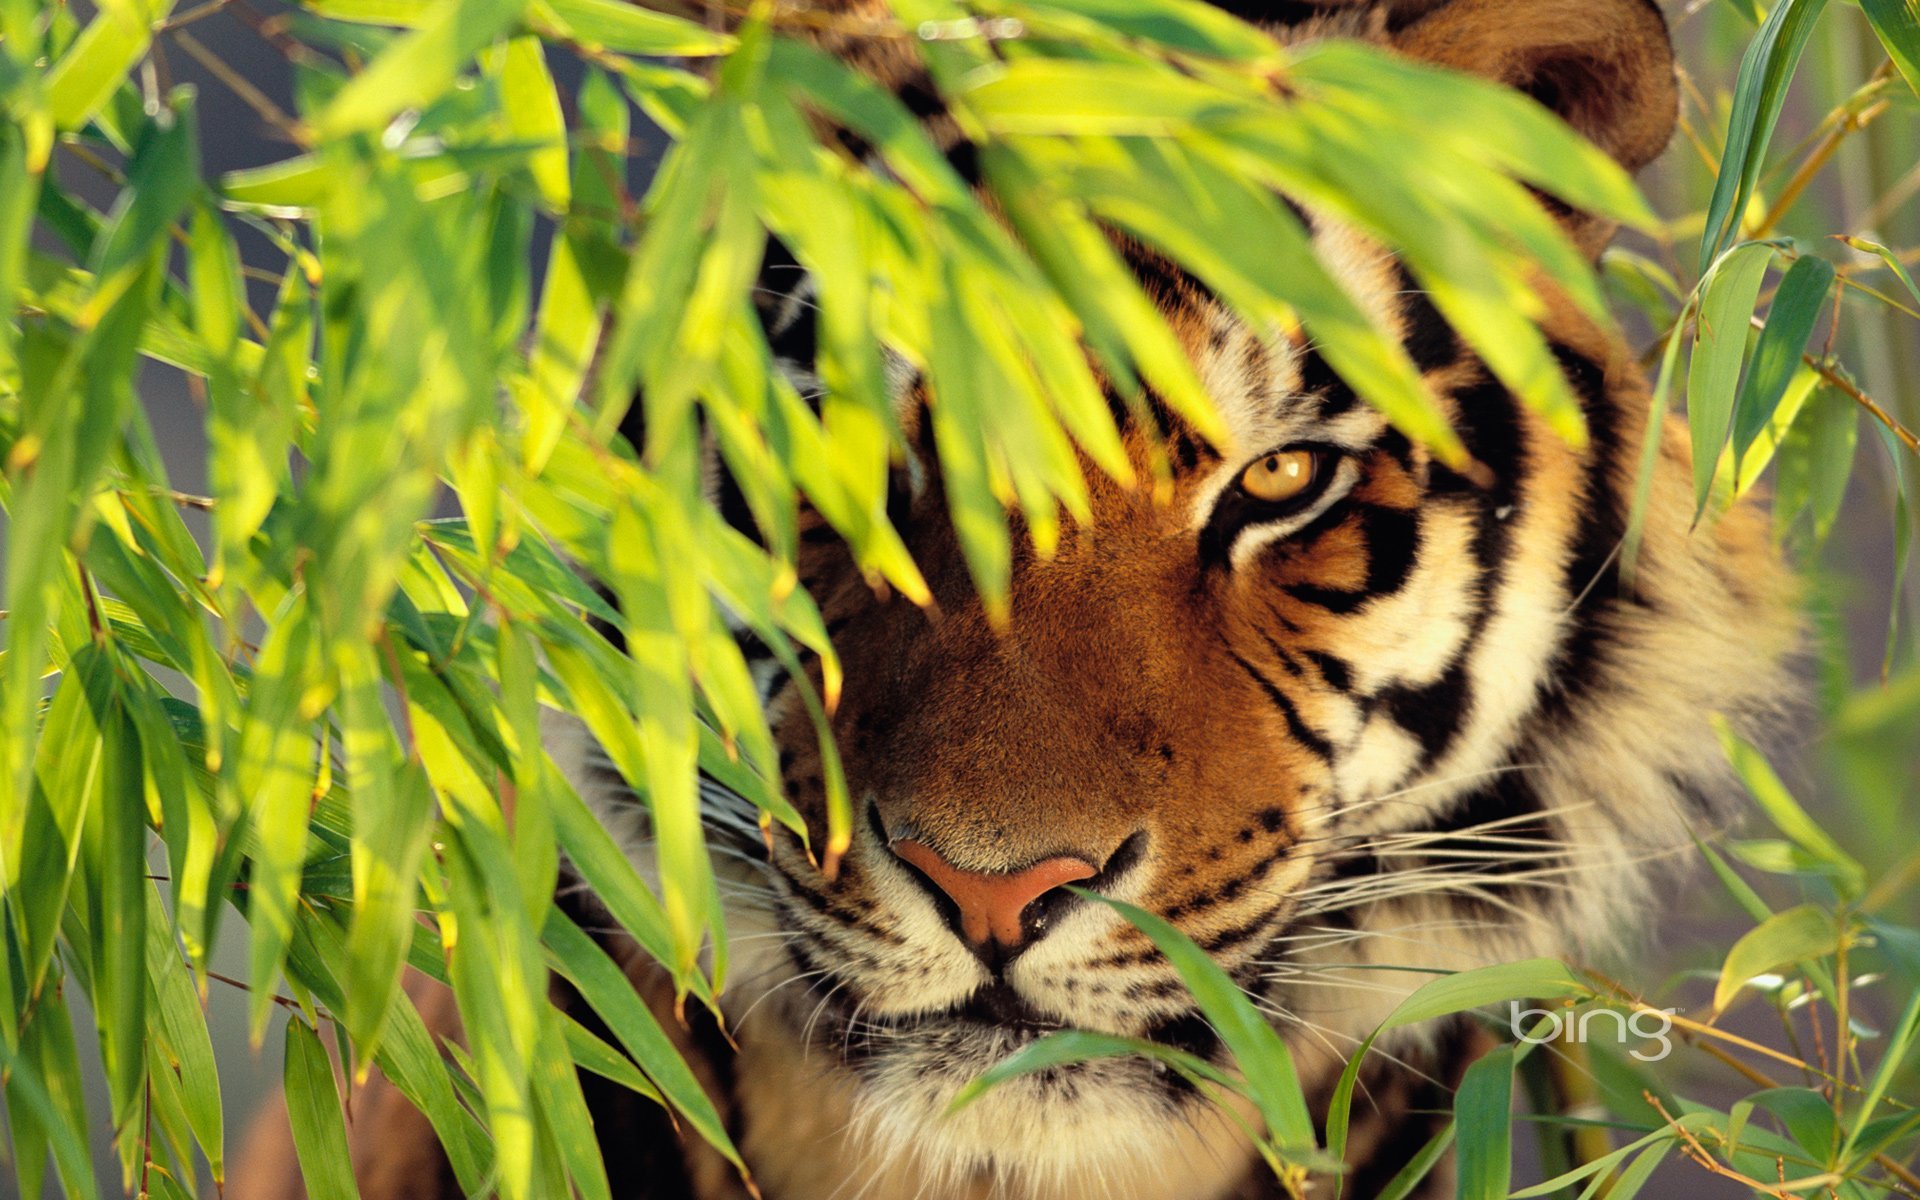  Tiger Bing Background Daily Pics Update HD Wallpapers Download